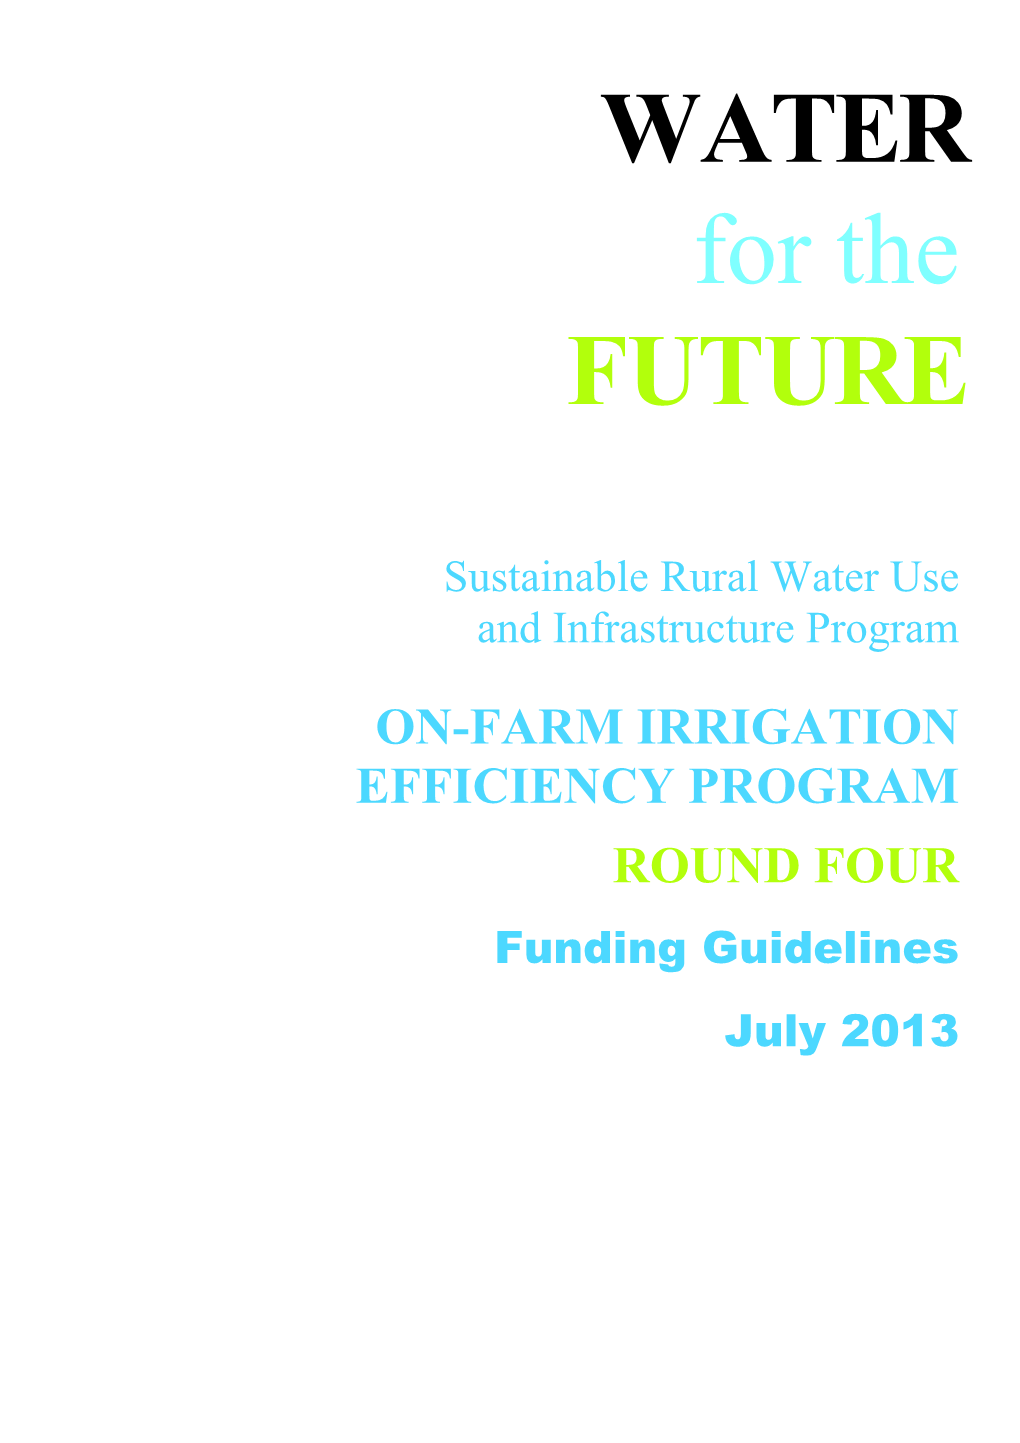 Round Four Funding Guidelines